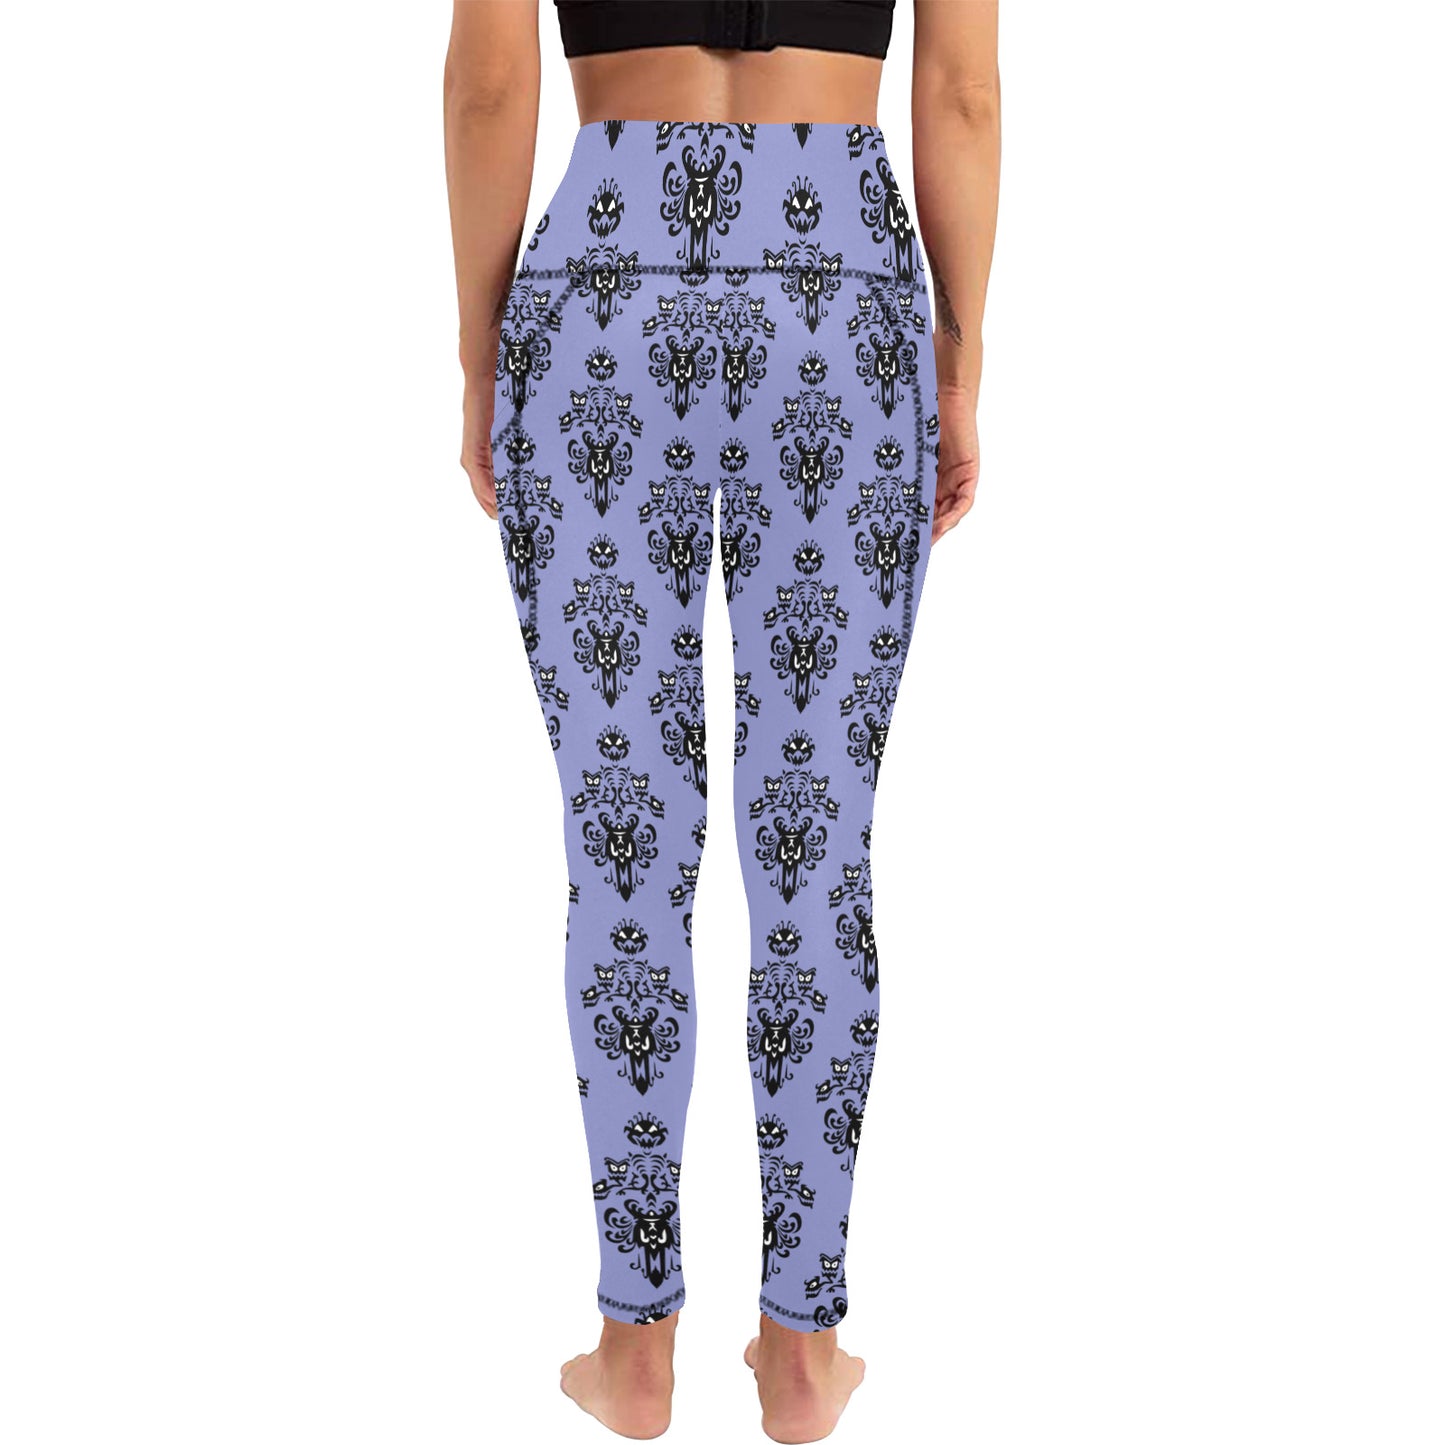 Haunted House Leggings with pockets